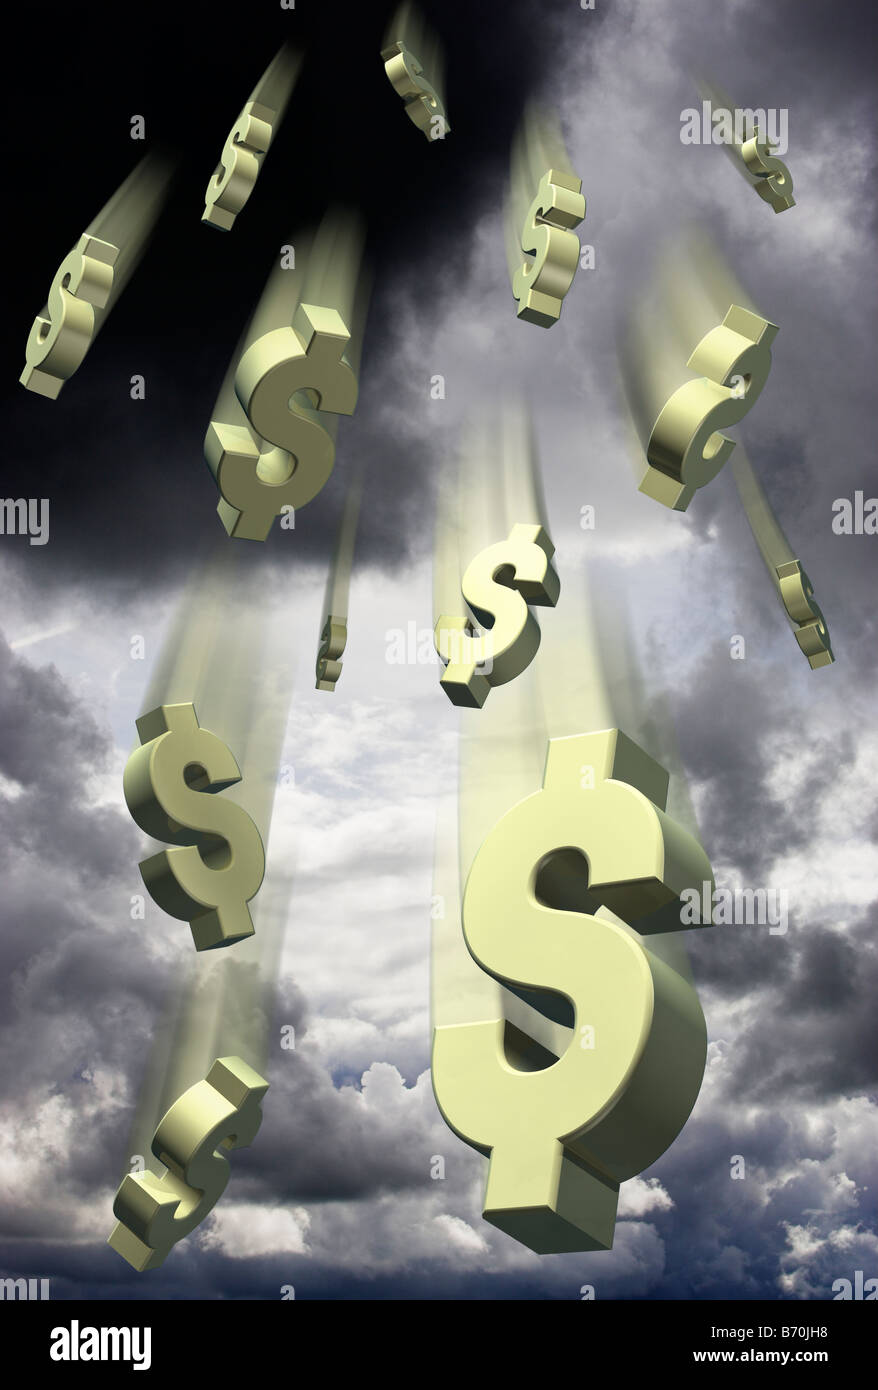 Falling US Dollar symbols against a stormy sky - digital composite Stock Photo